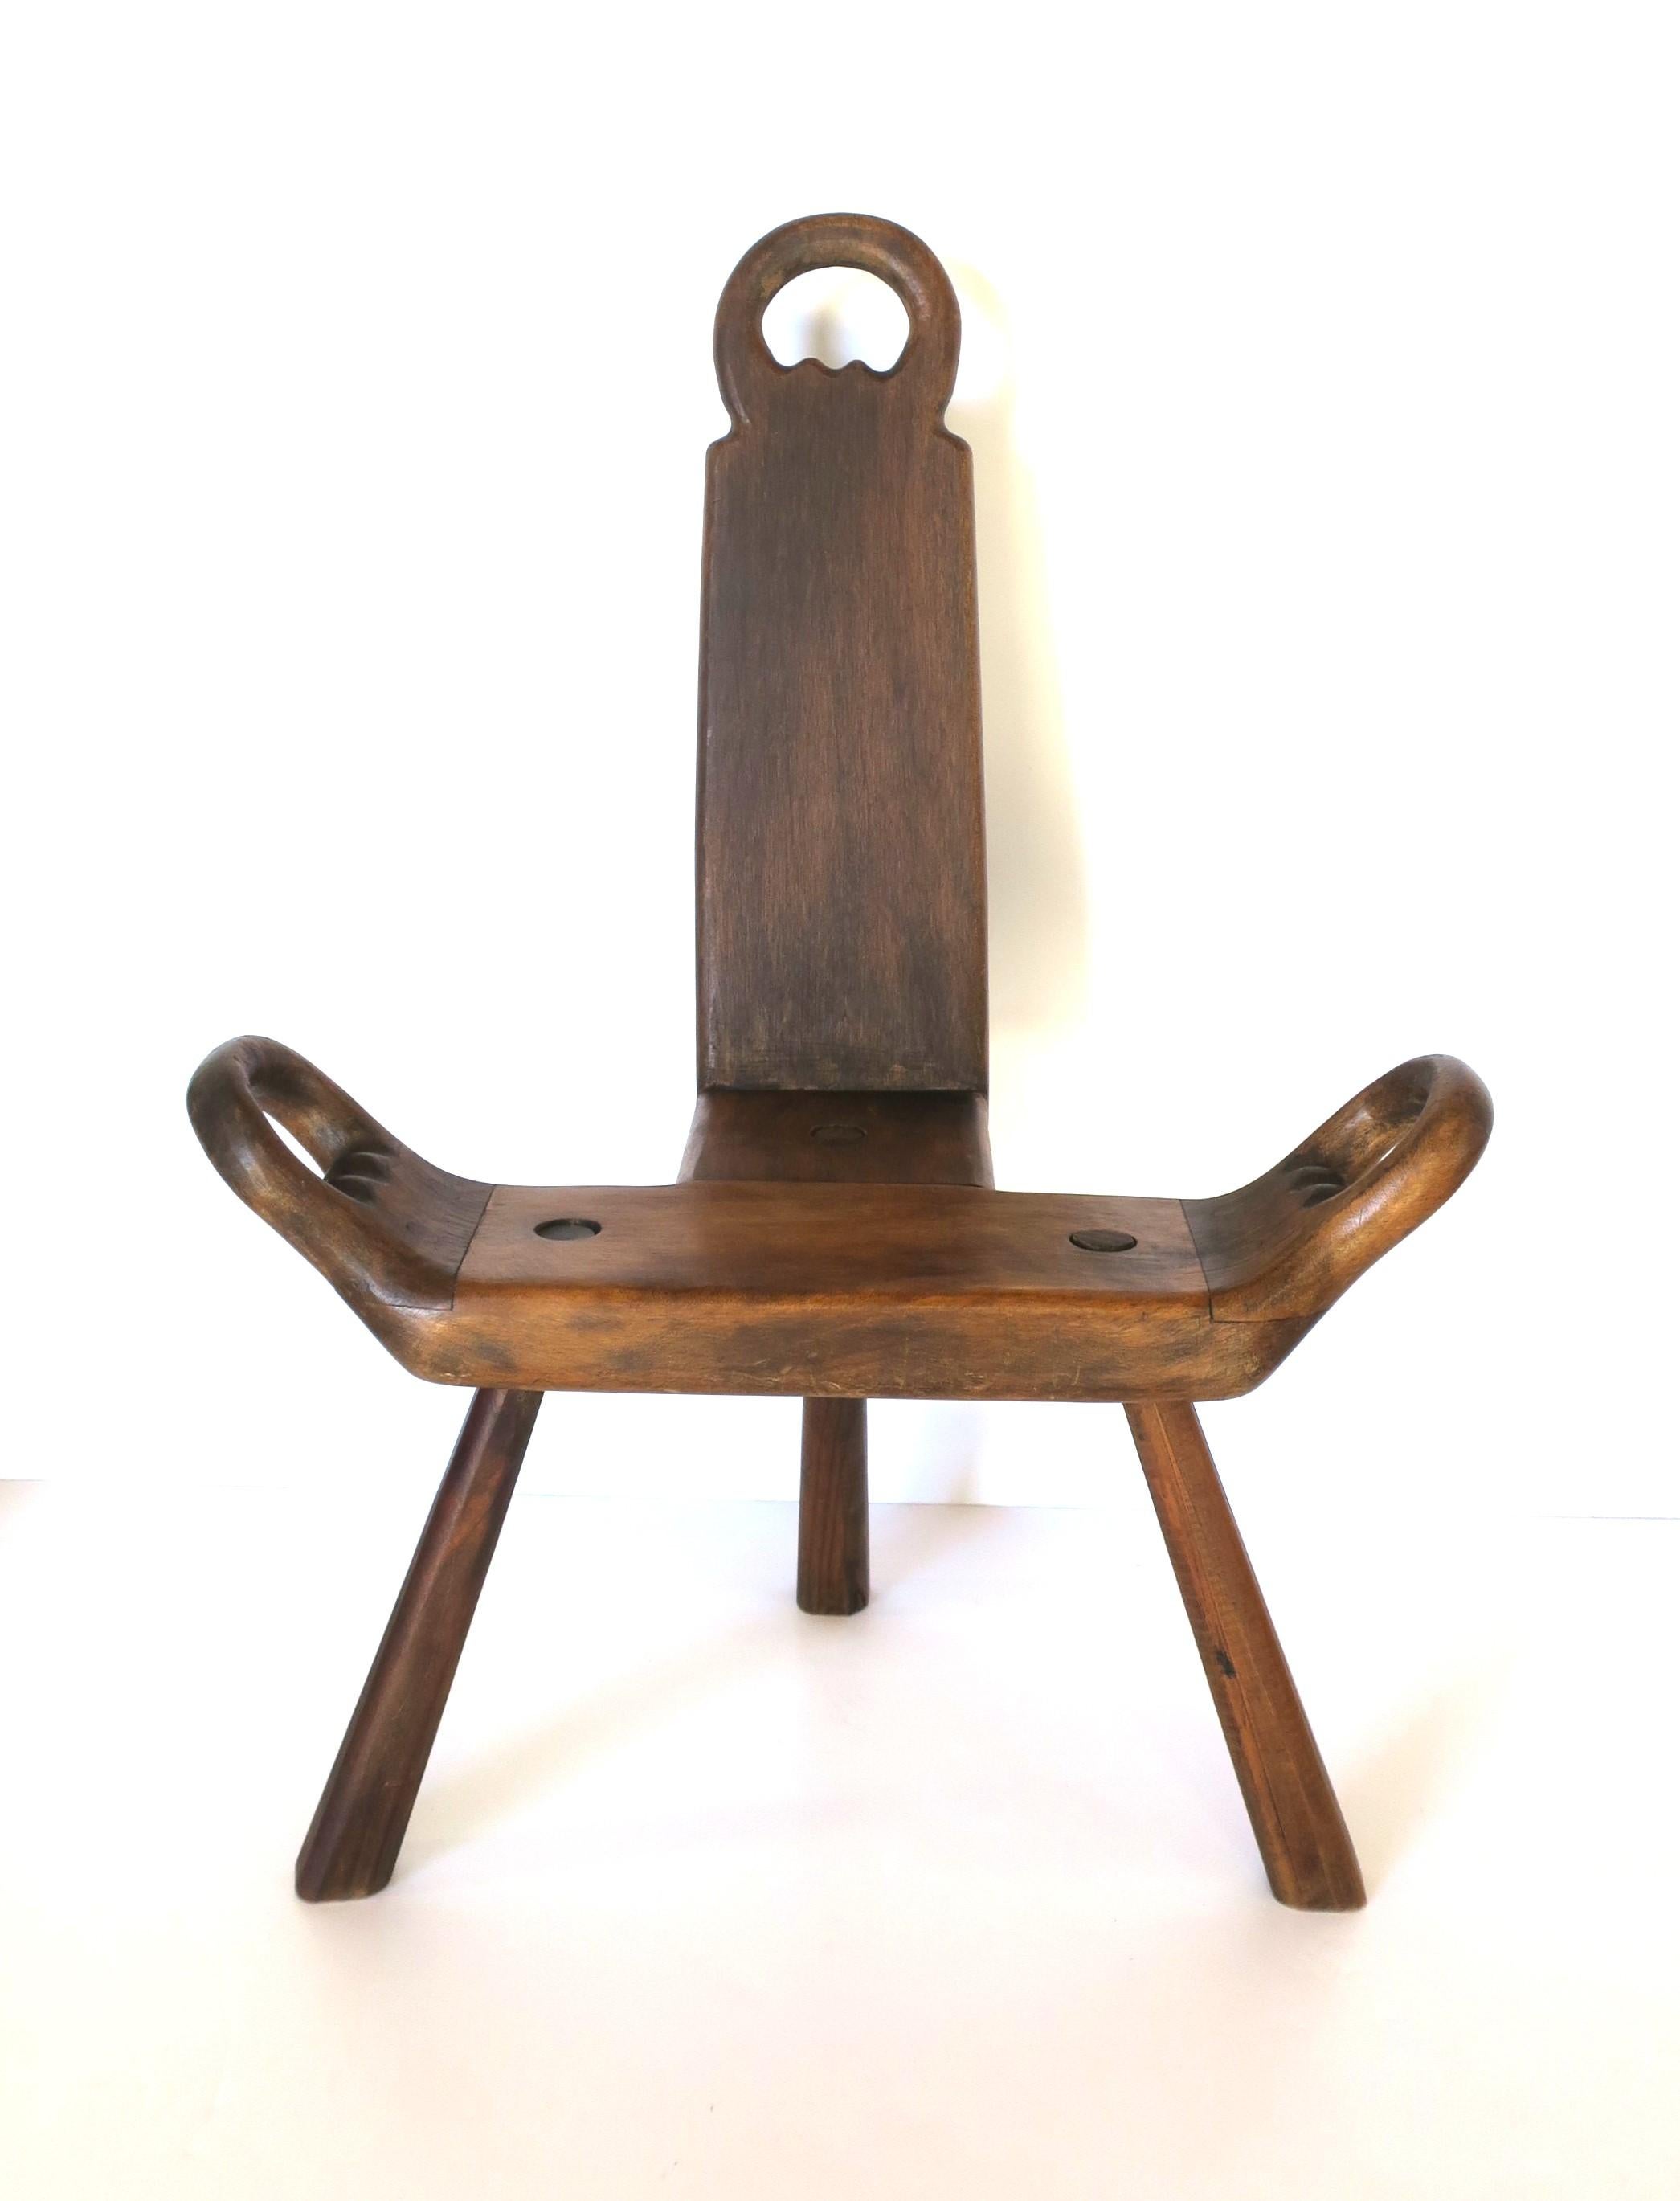 A beautiful Italian Sgabello wood side chair or stool, circa mid-20th century, Italy. 

Dimensions: 21.5